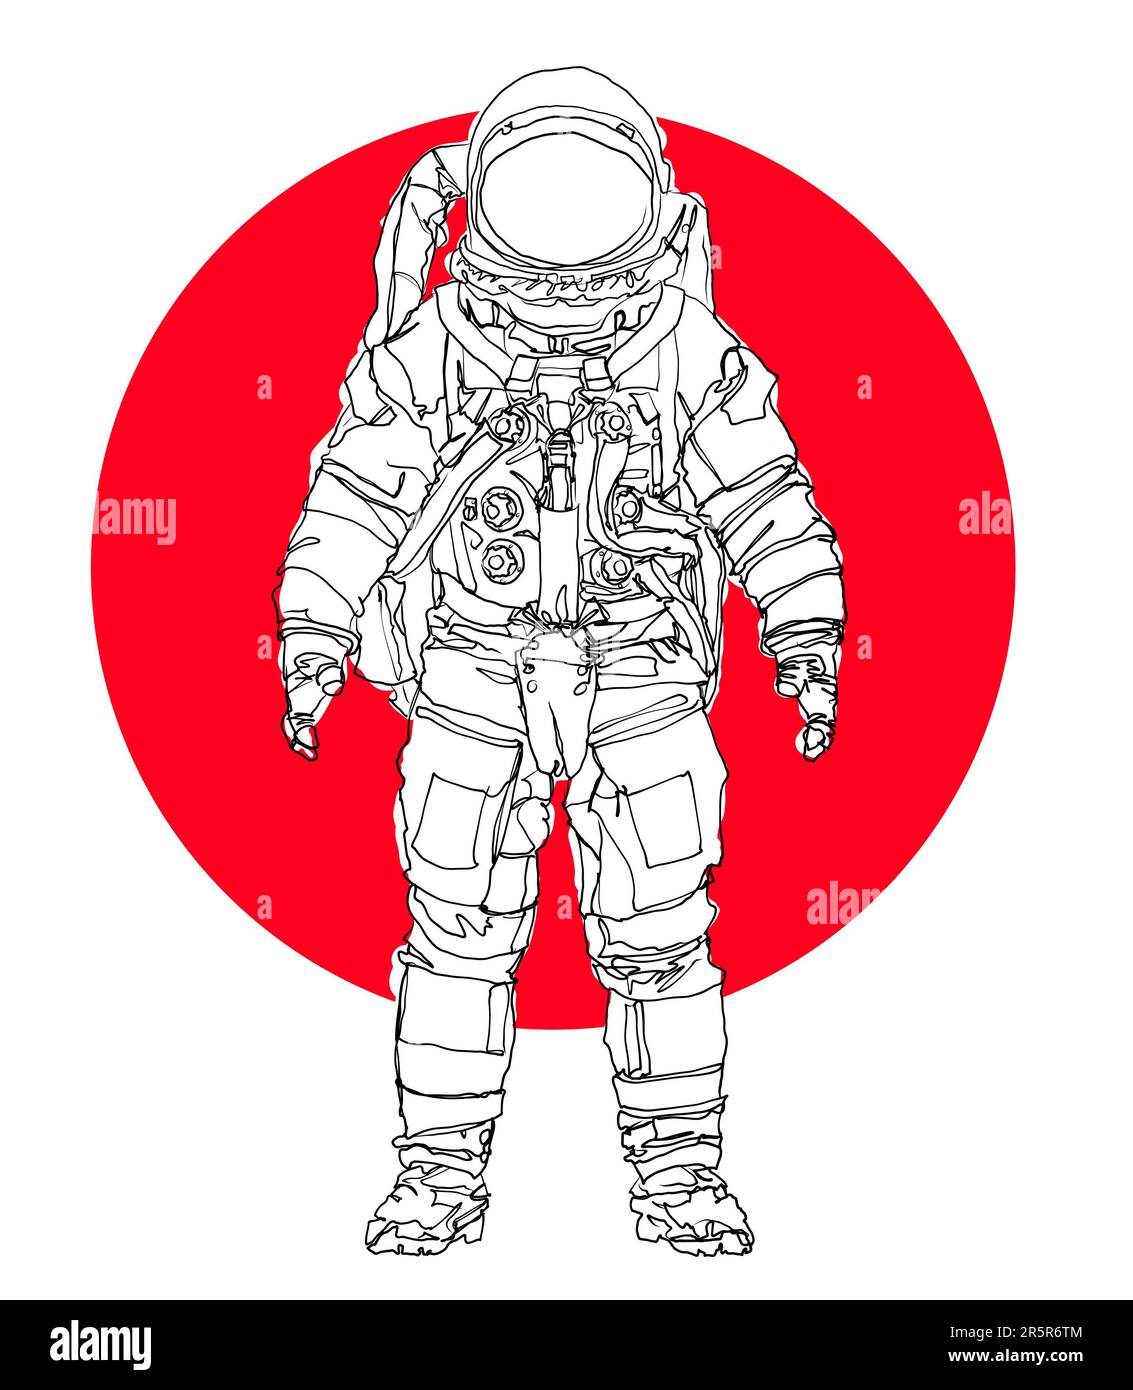 Astronaut Line Drawing Spaceman Hand Drawn Red Sun Graphic Retro Illustration Overlay Layer Illustration Stock Photo